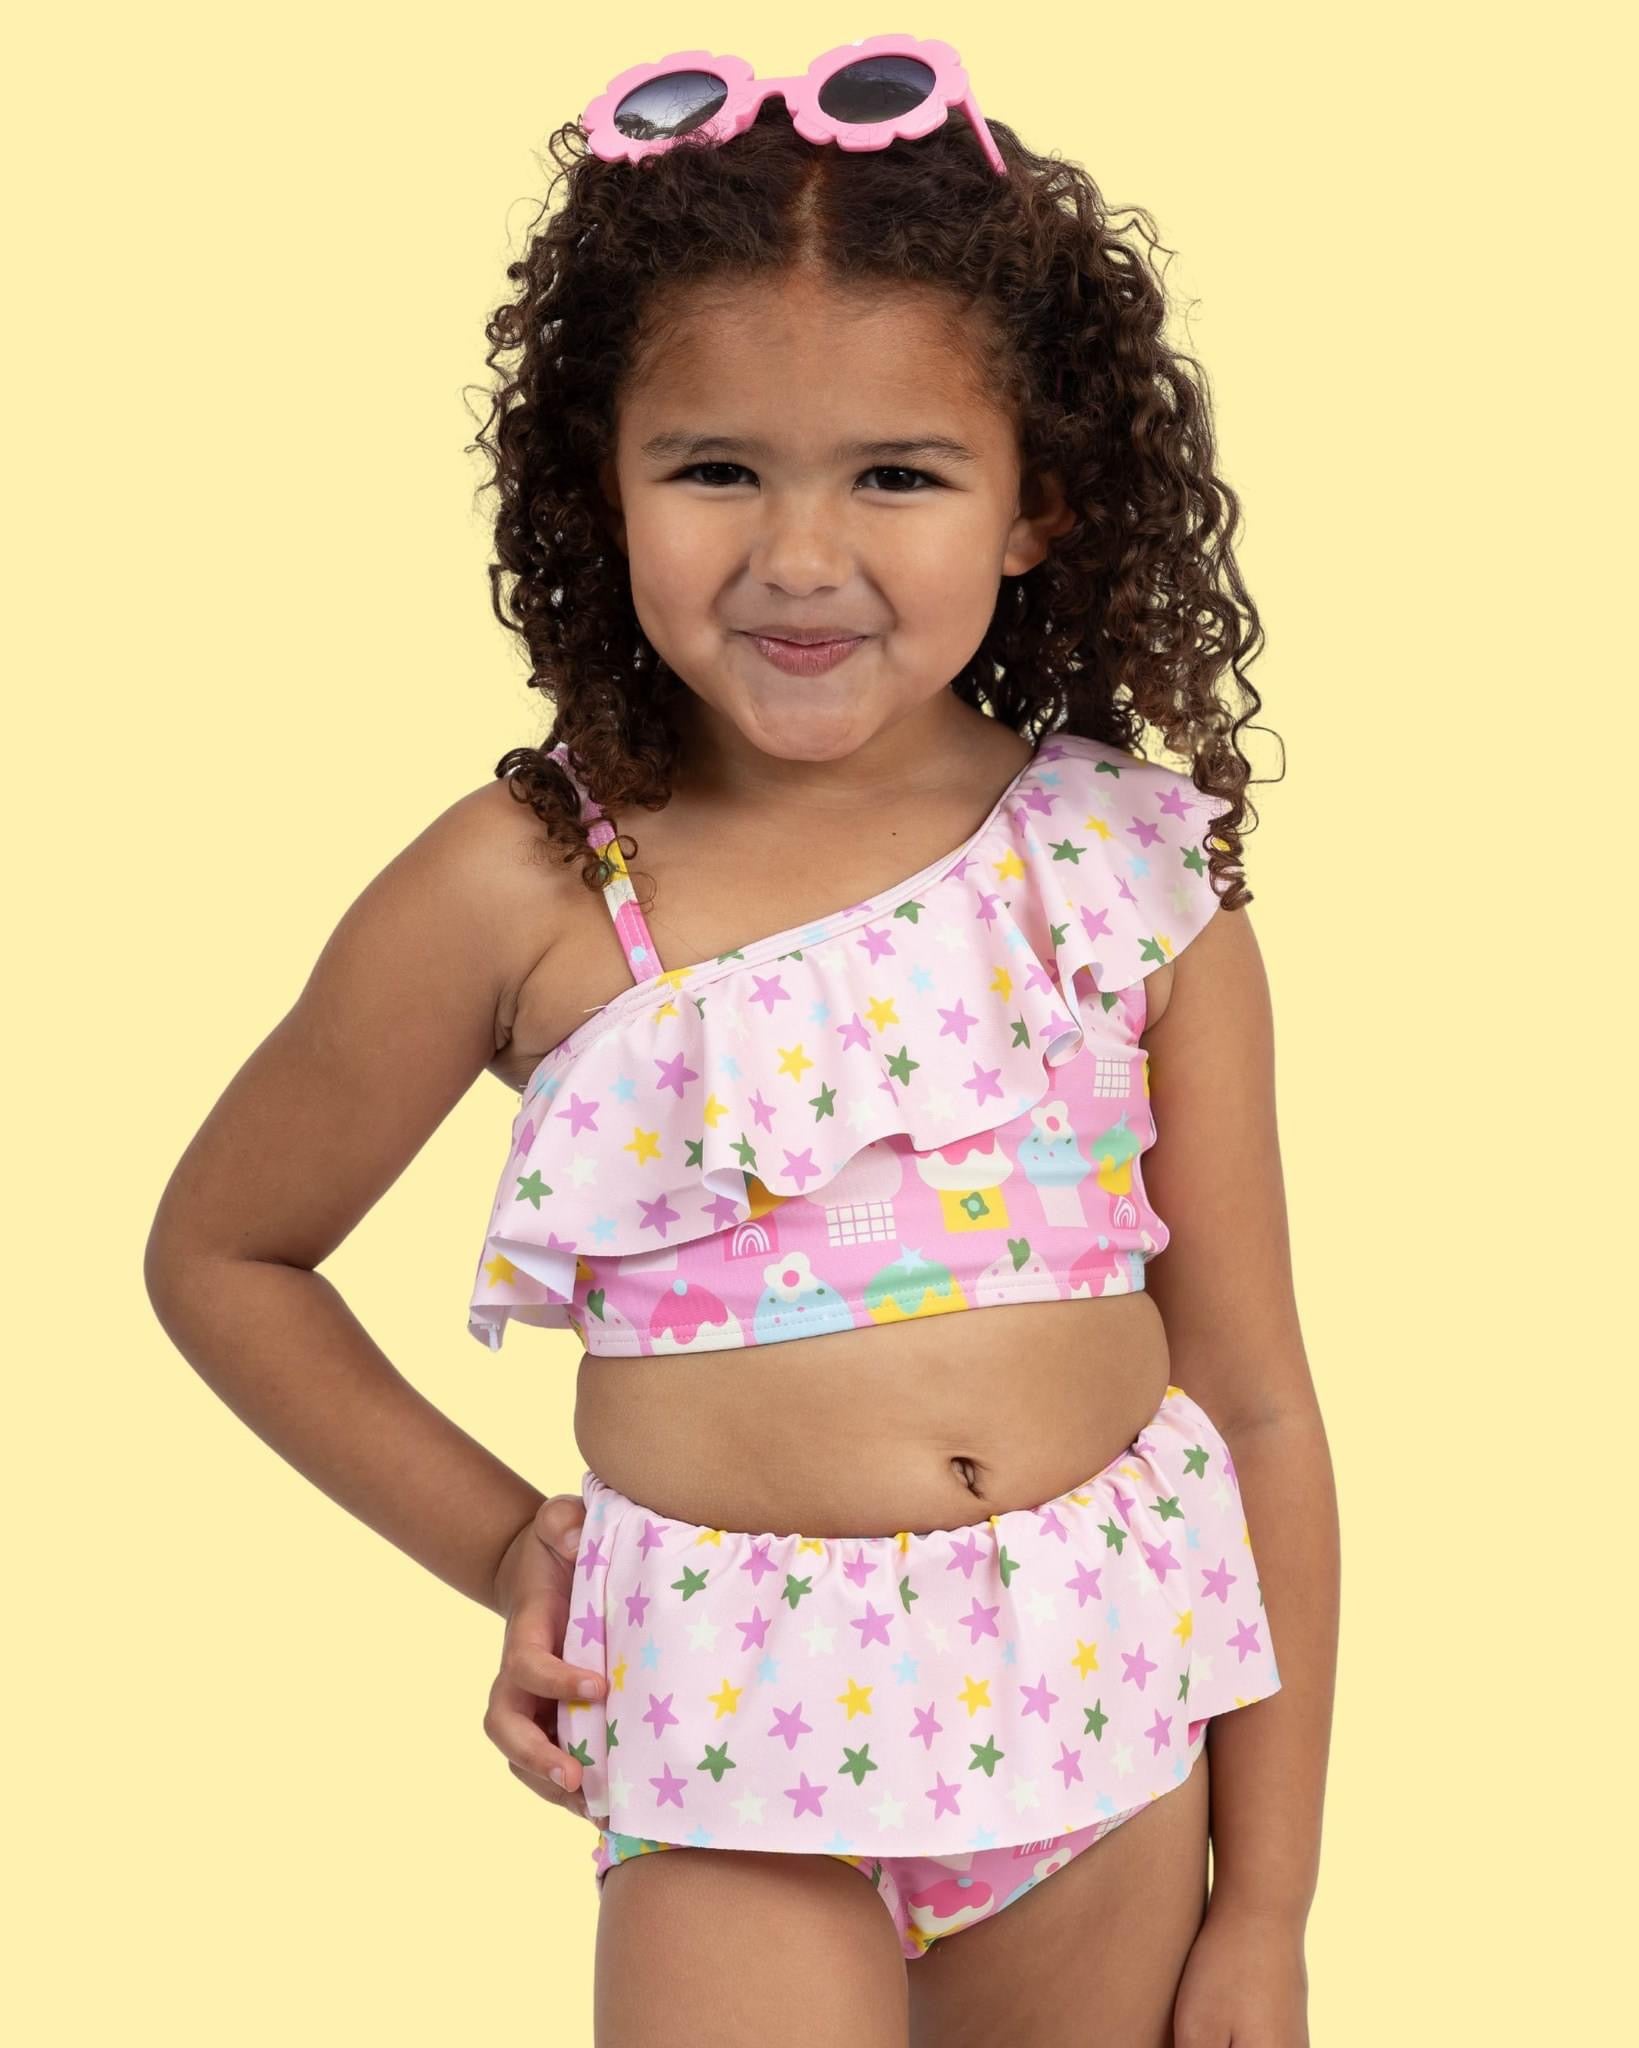 Cute As A Cupcake Two Piece Swimsuit by Pete and Lucy